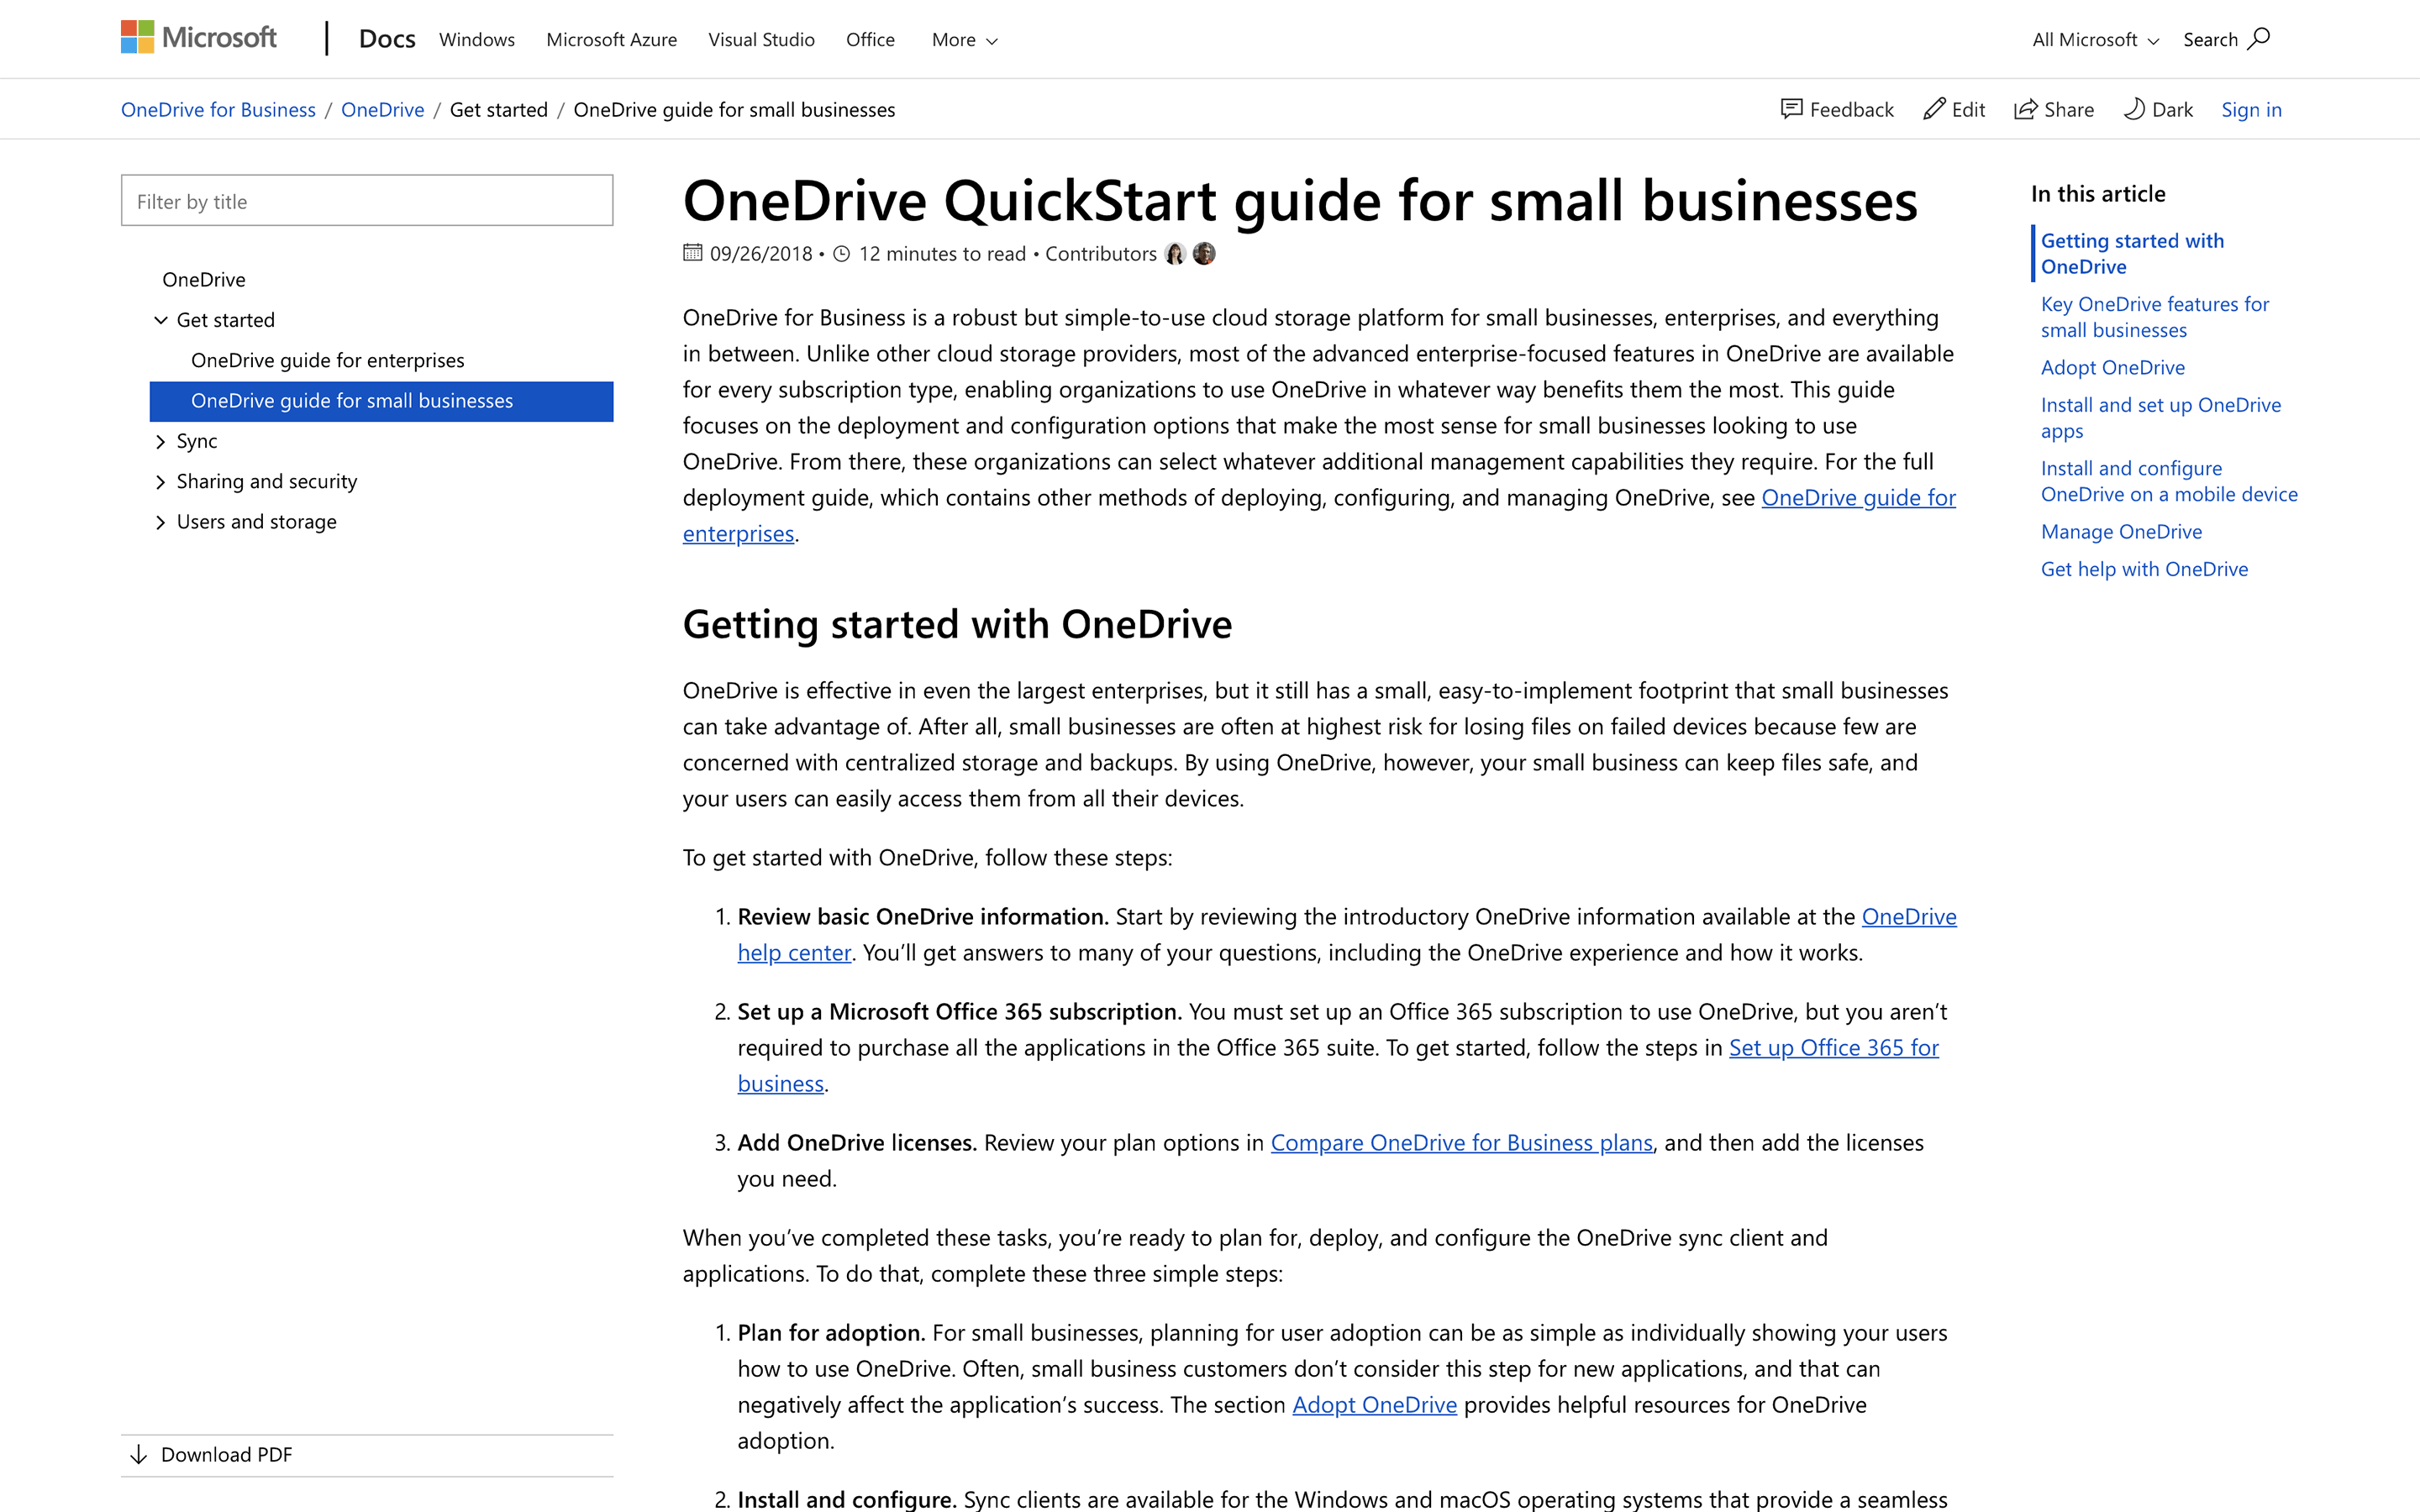 Screenshot of the introduction to the OneDrive QuickStart guide for small businesses